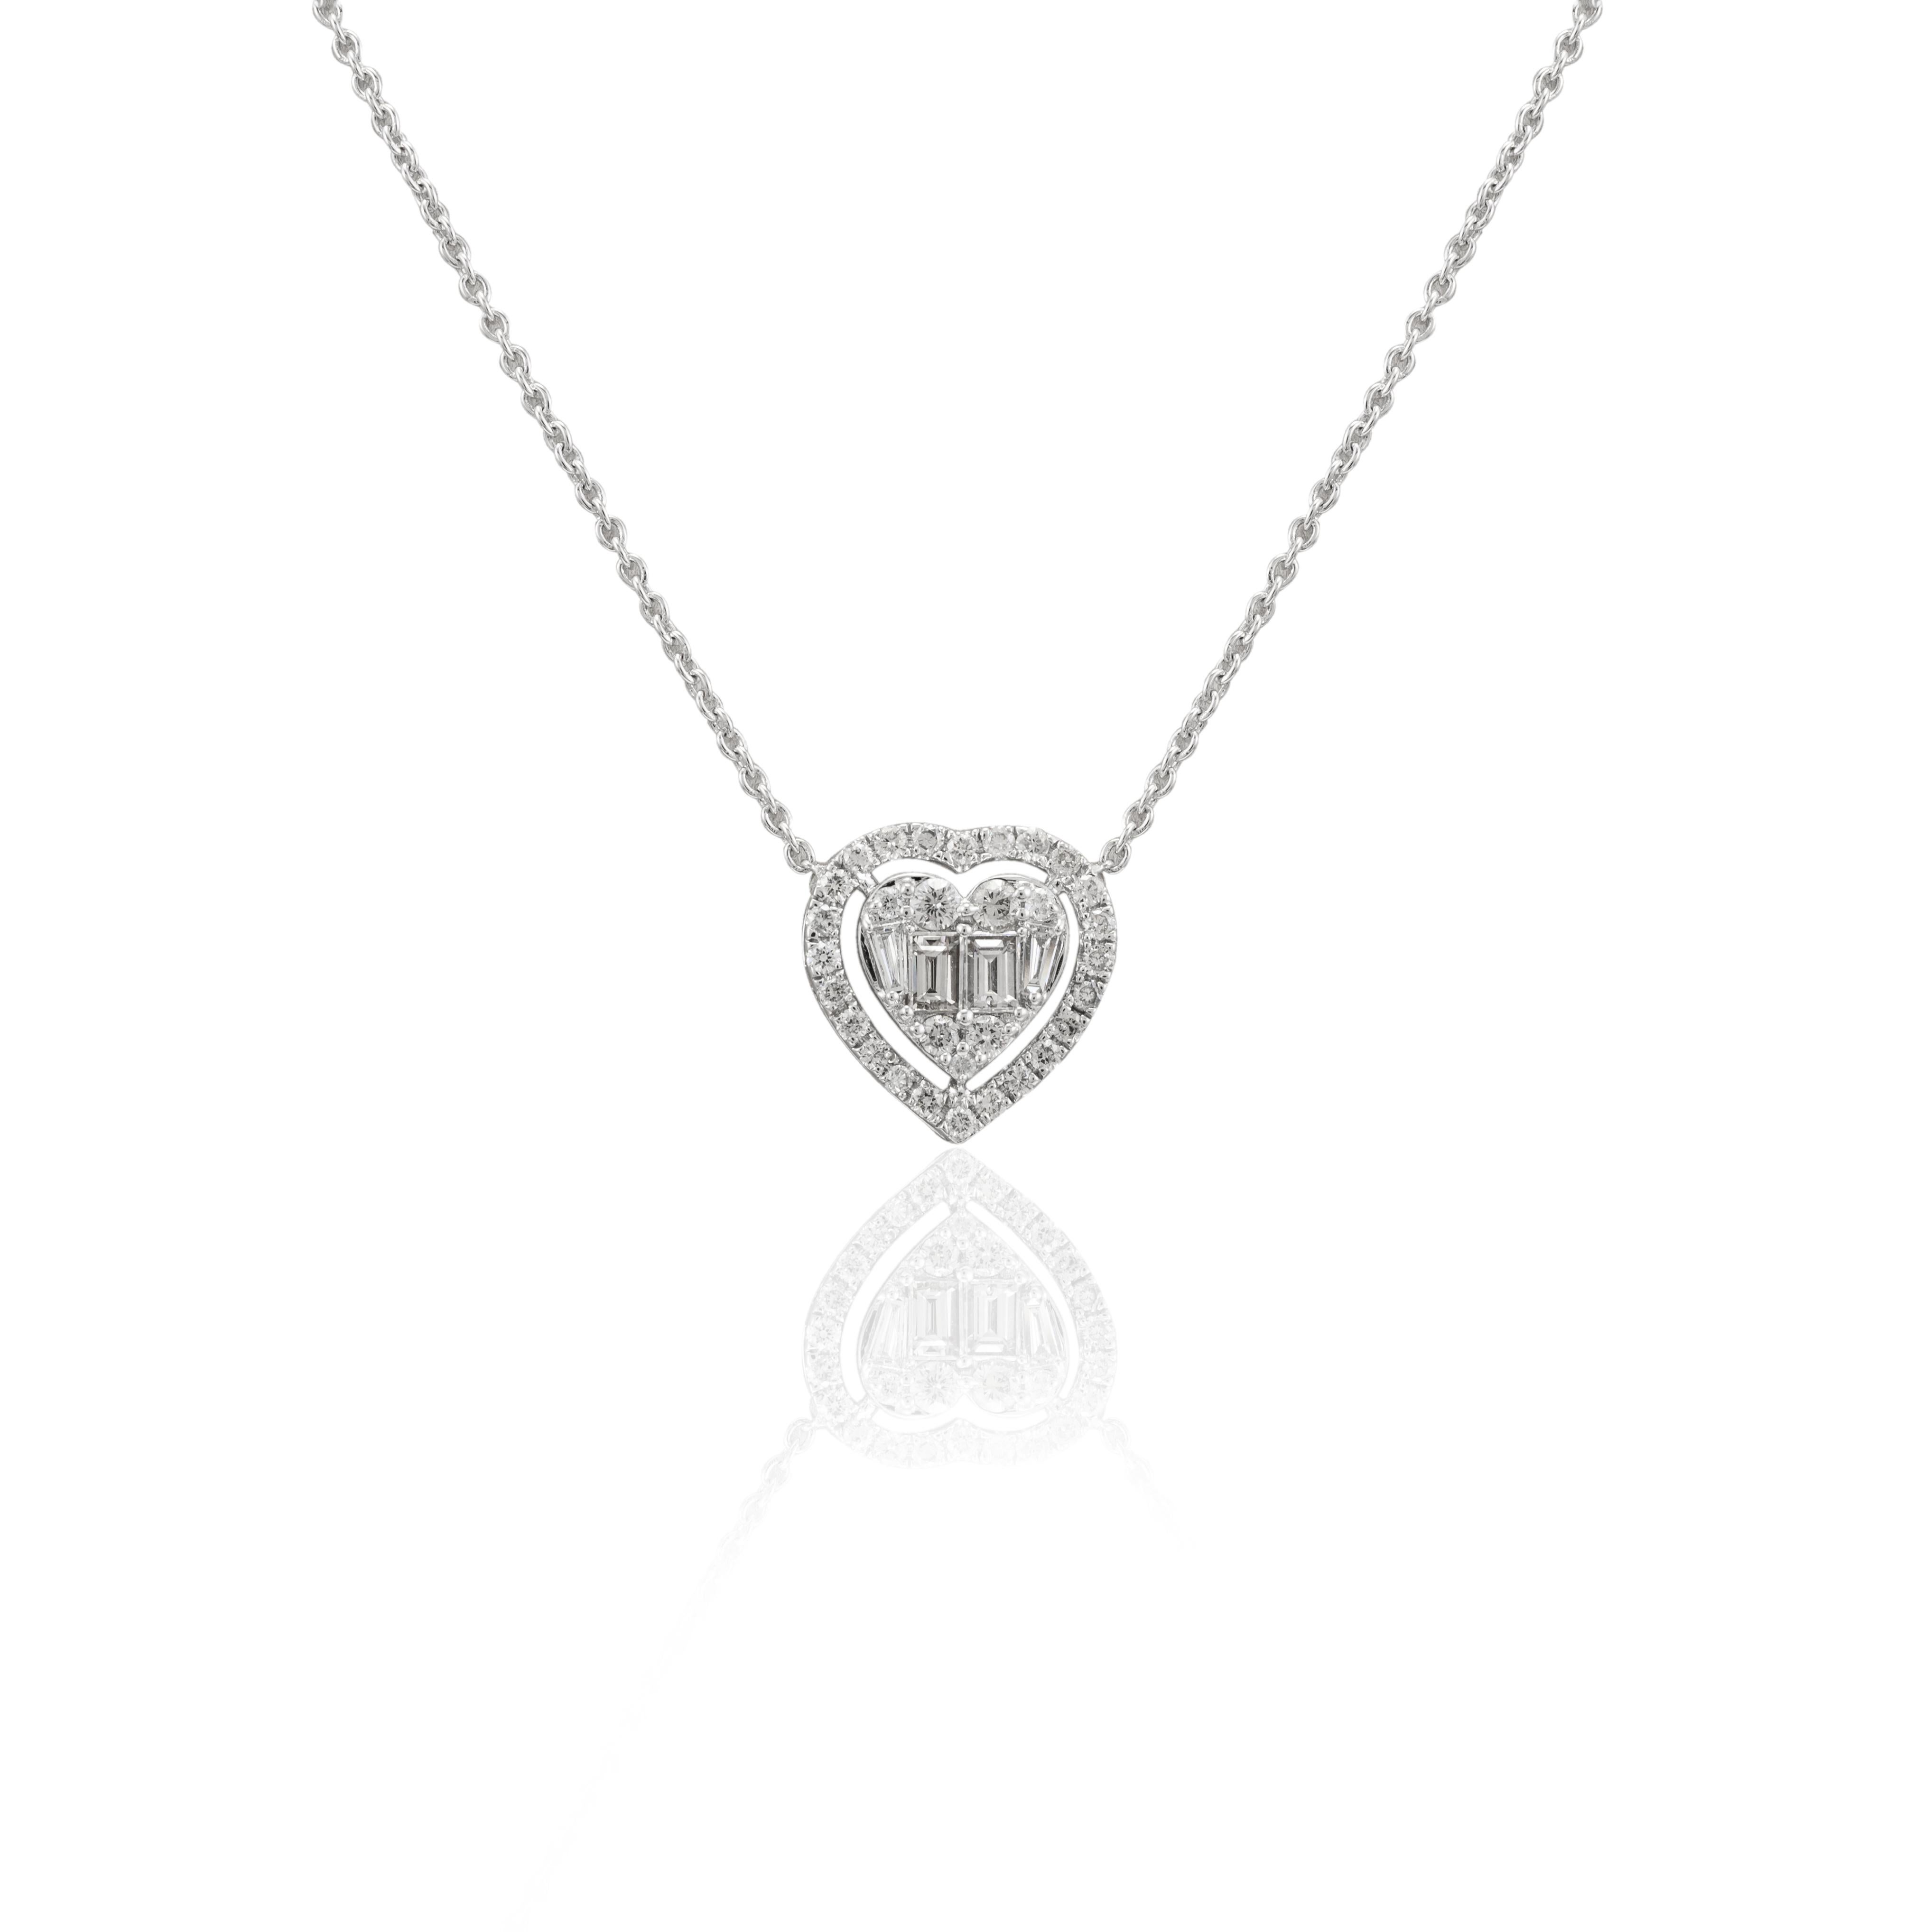 Women's Heart Diamond Pendant Necklace 18k Solid White Gold, Gift For Her Christmas For Sale